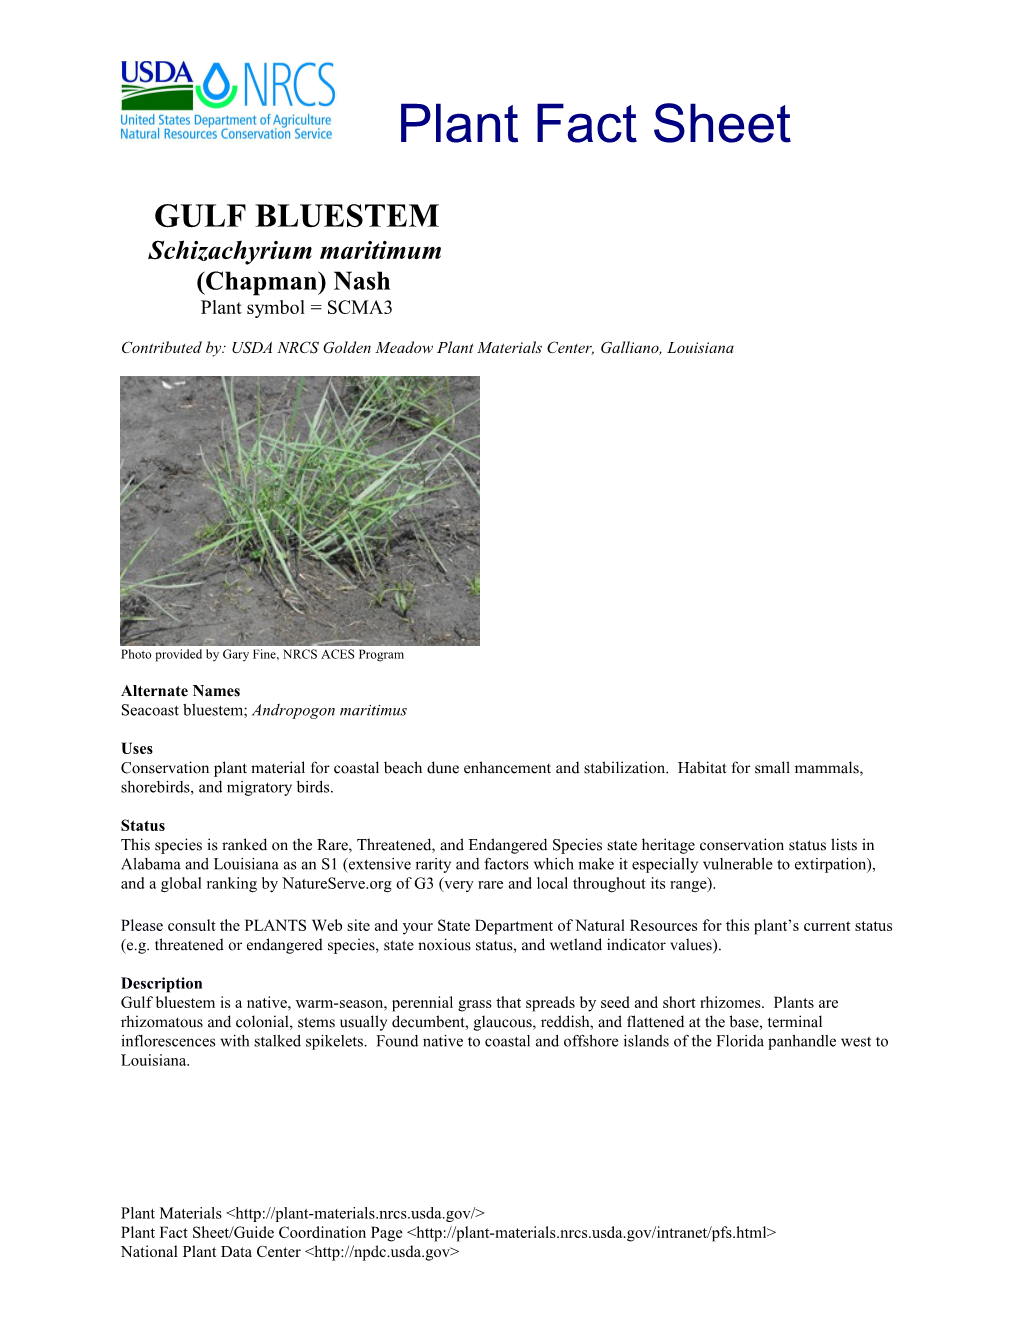 Contributed By: USDA NRCS Golden Meadow Plant Materials Center, Galliano, Louisiana